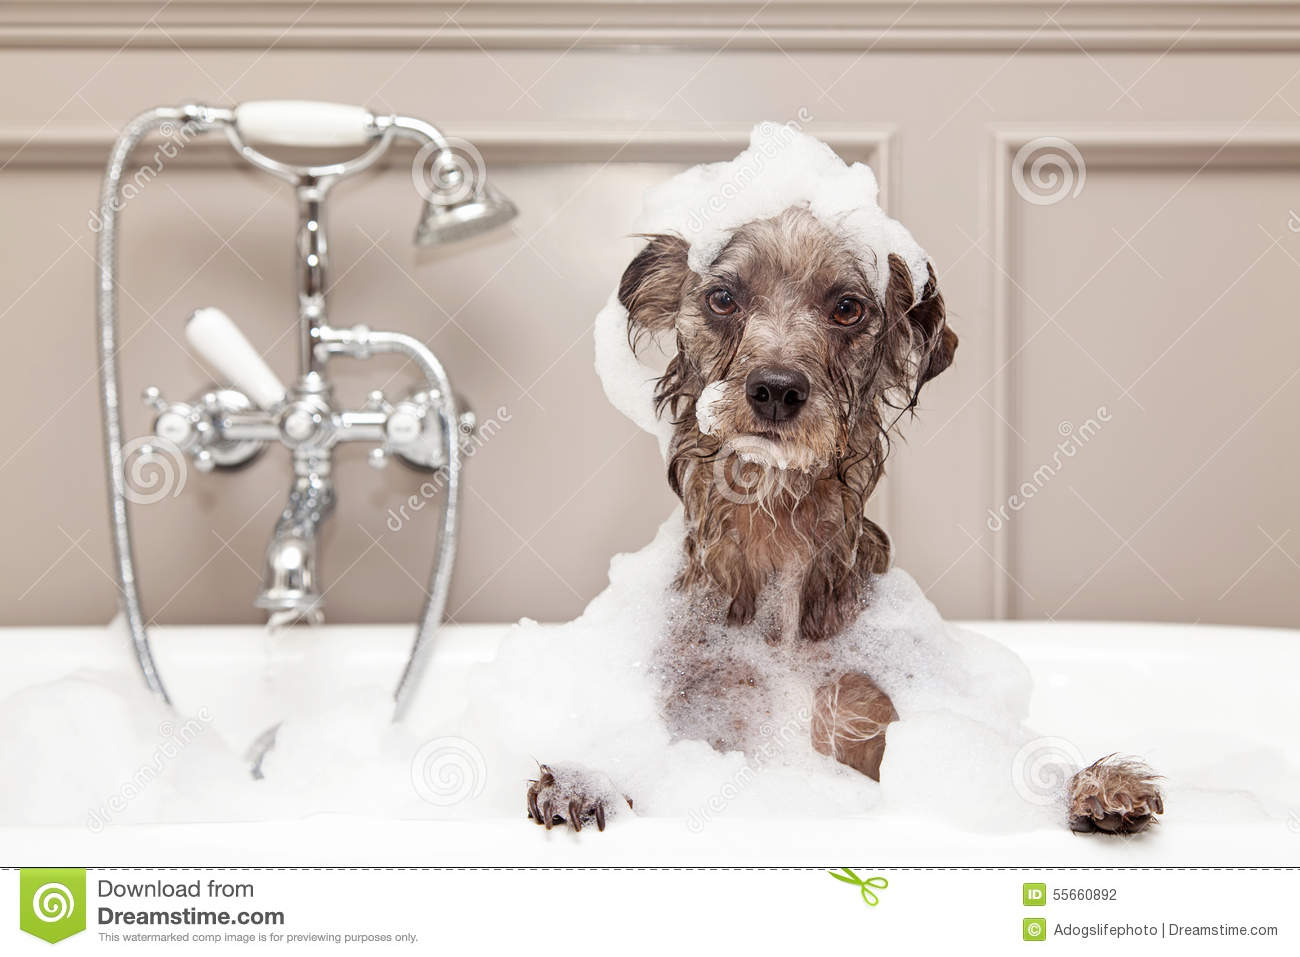 dog bath - Msu dreantime dreamstime Id 55660892 Download from Dreamstime.com This watermarked comp image is for previewing purposes only. Adogslifephoto Dreamstime.com